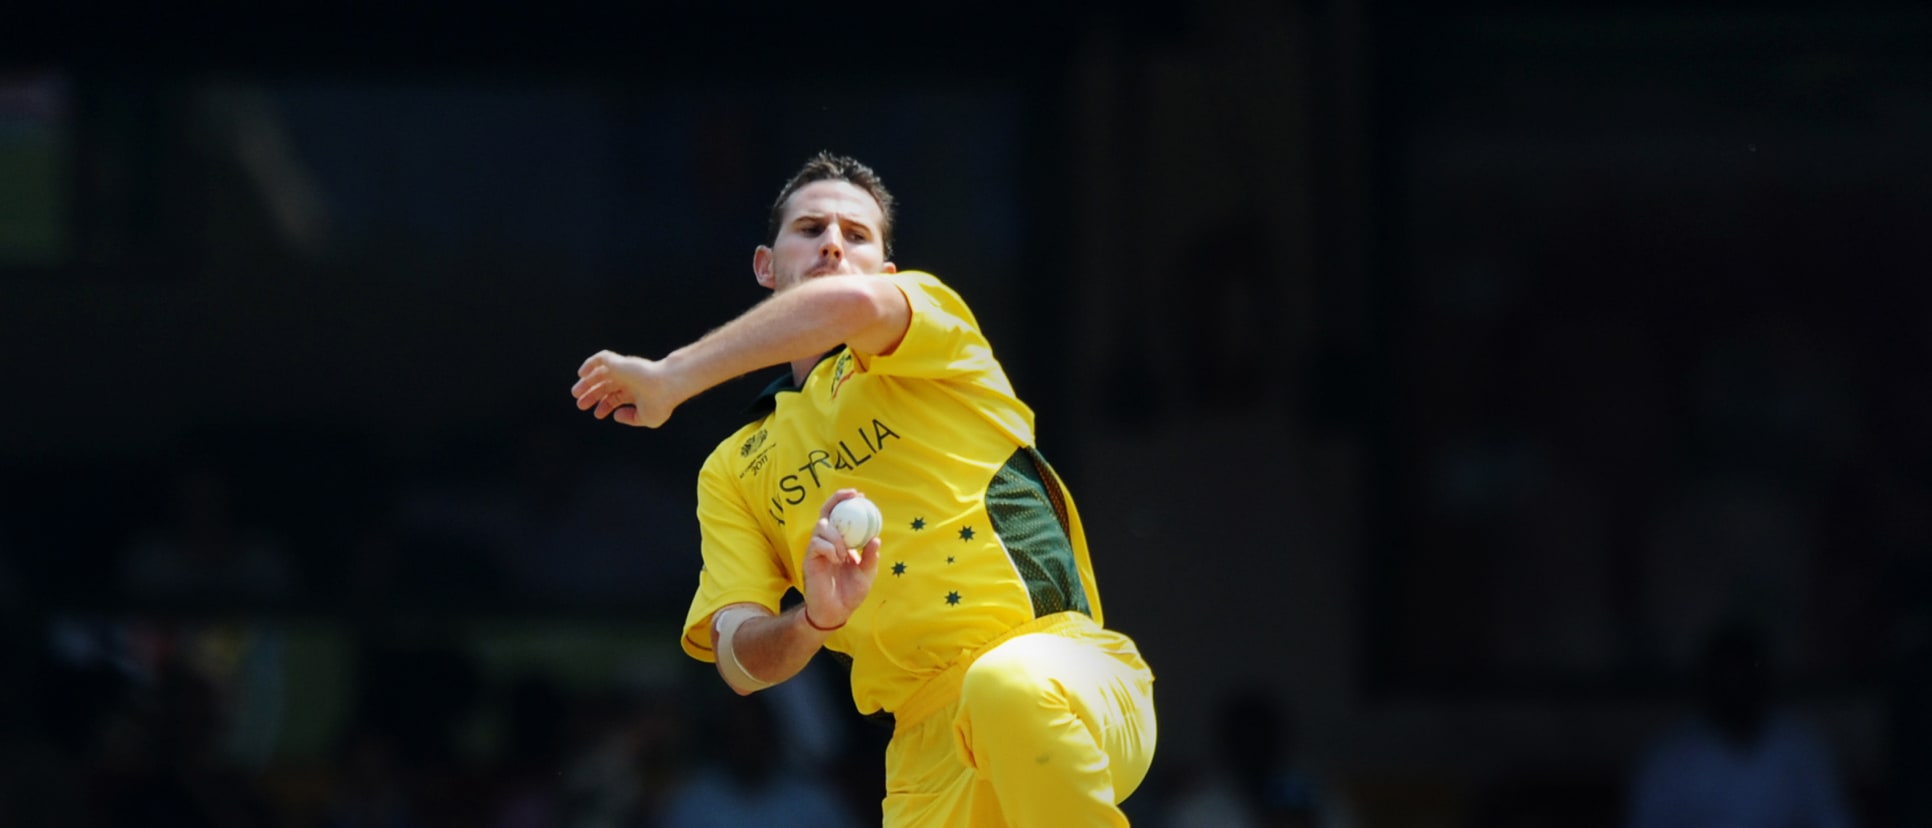 Shaun Tait was Maxwell's fifth and final pick